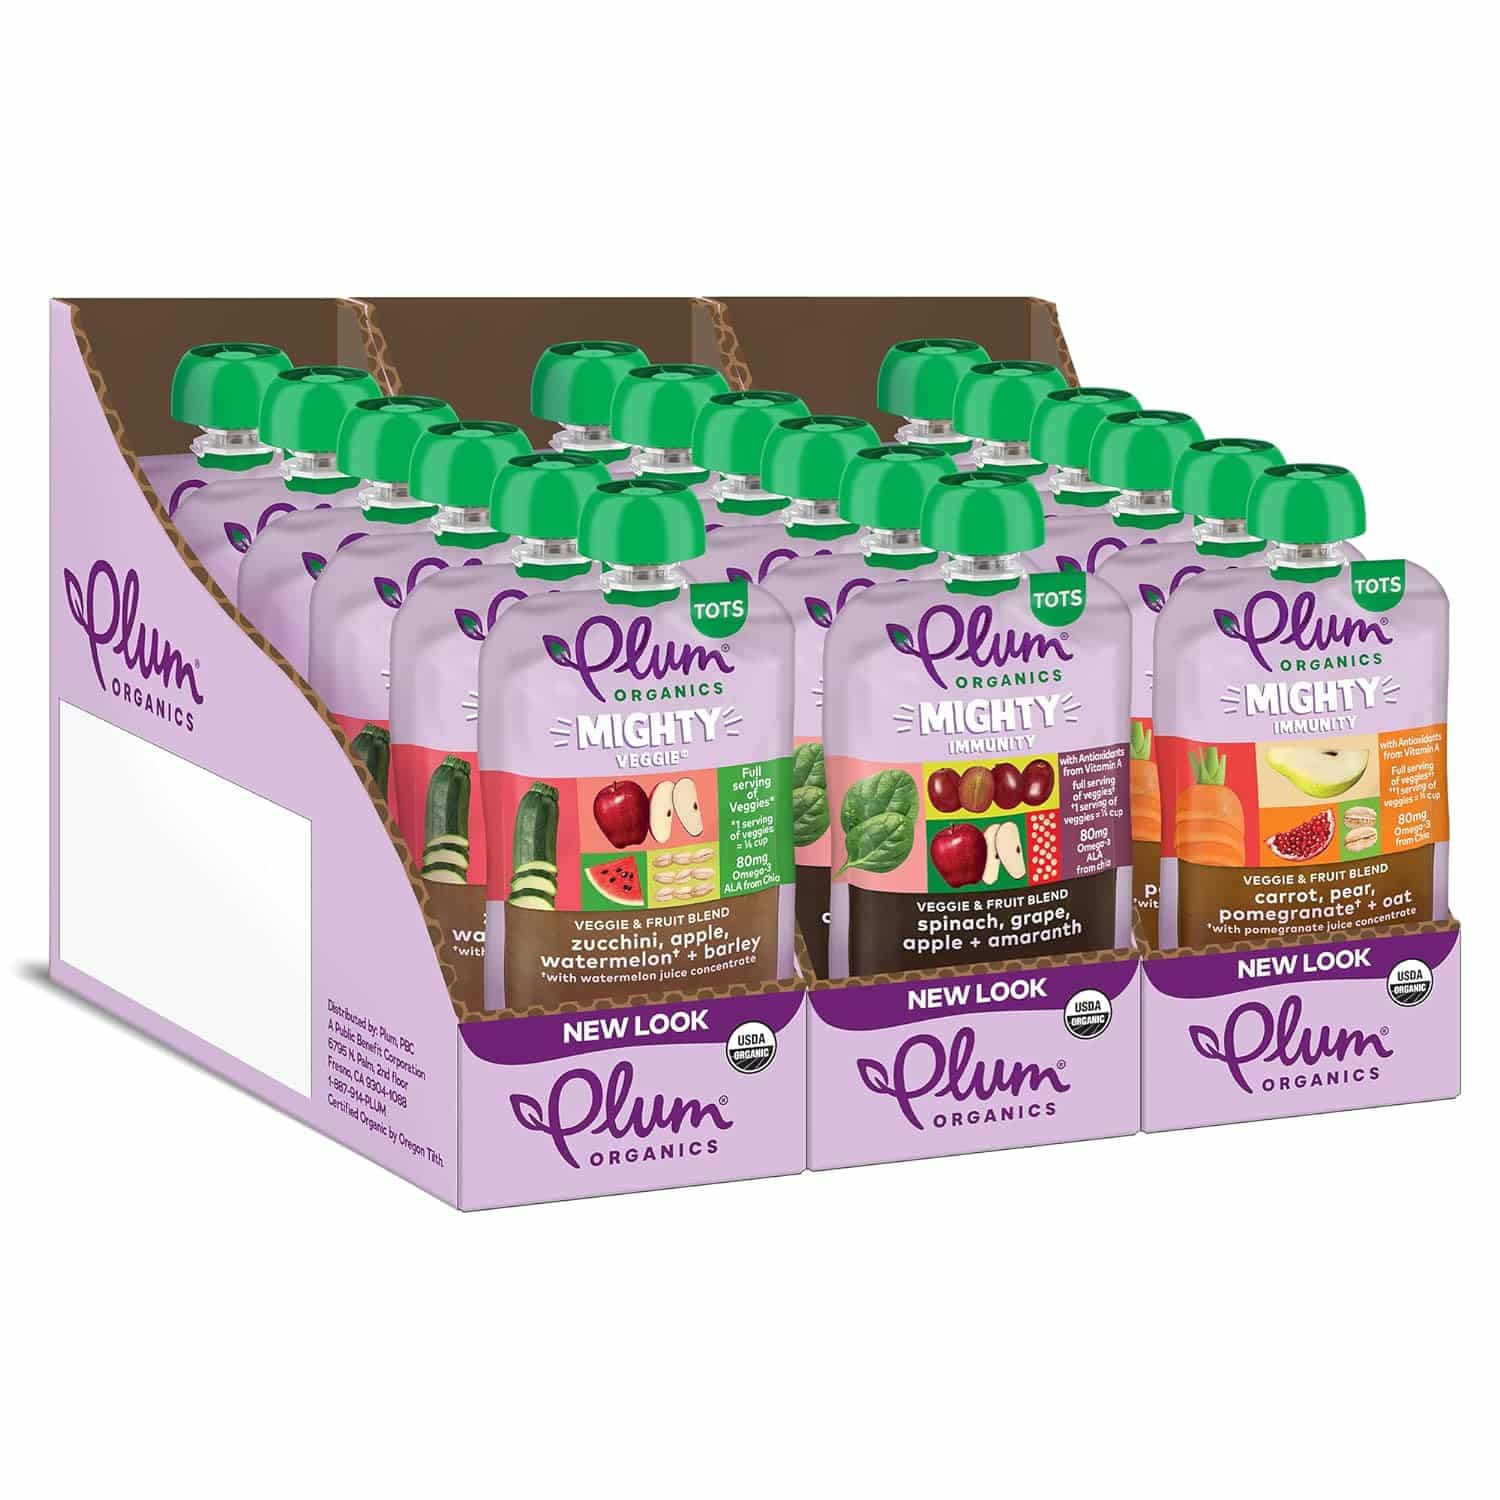 Plum Organics Mighty Veggie Blends Organic Baby Food Meals: A Nutritious and Delicious Review